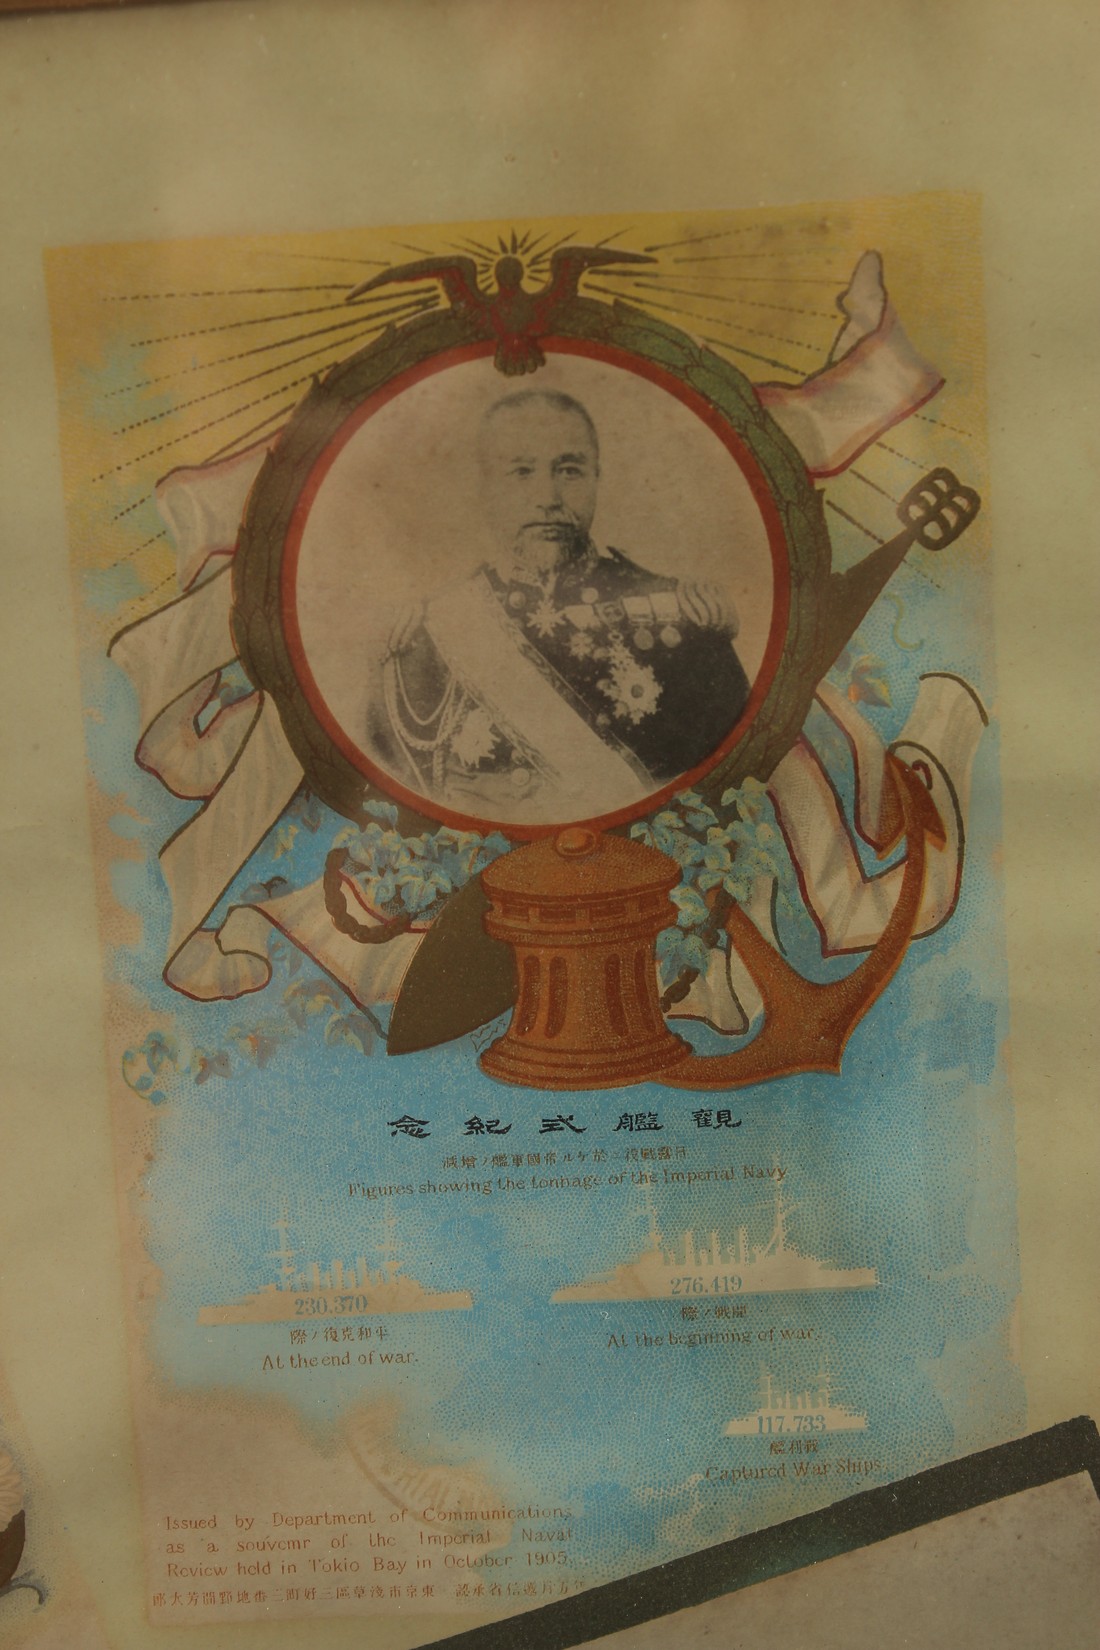 A LARGE JAPANESE COMMEMORATIVE PRINT FOR THE RUSSO-JAPANESE WAR, C.1906, with several interesting - Image 6 of 10